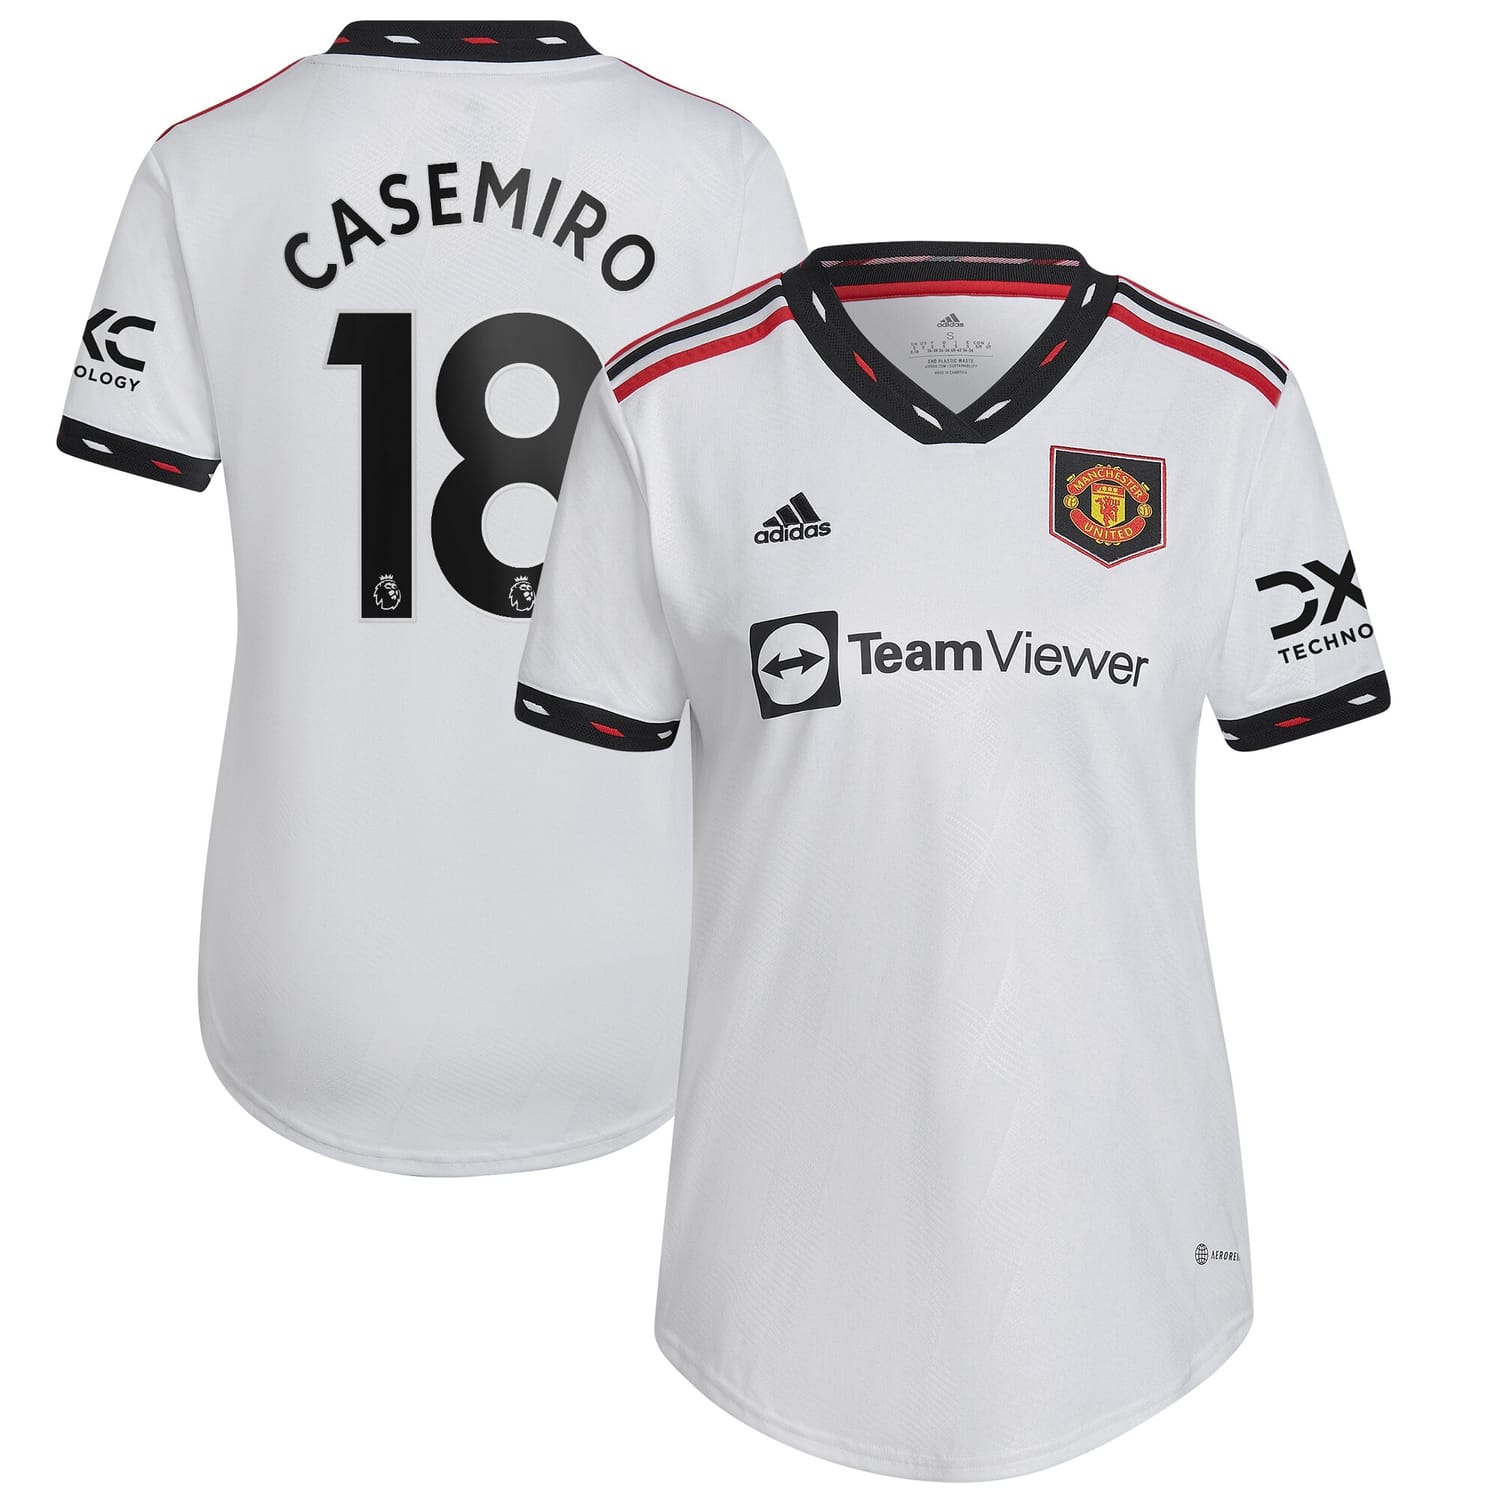 Premier League Manchester United Away Jersey Shirt White 2022-23 player Carlos Casemiro printing for Women